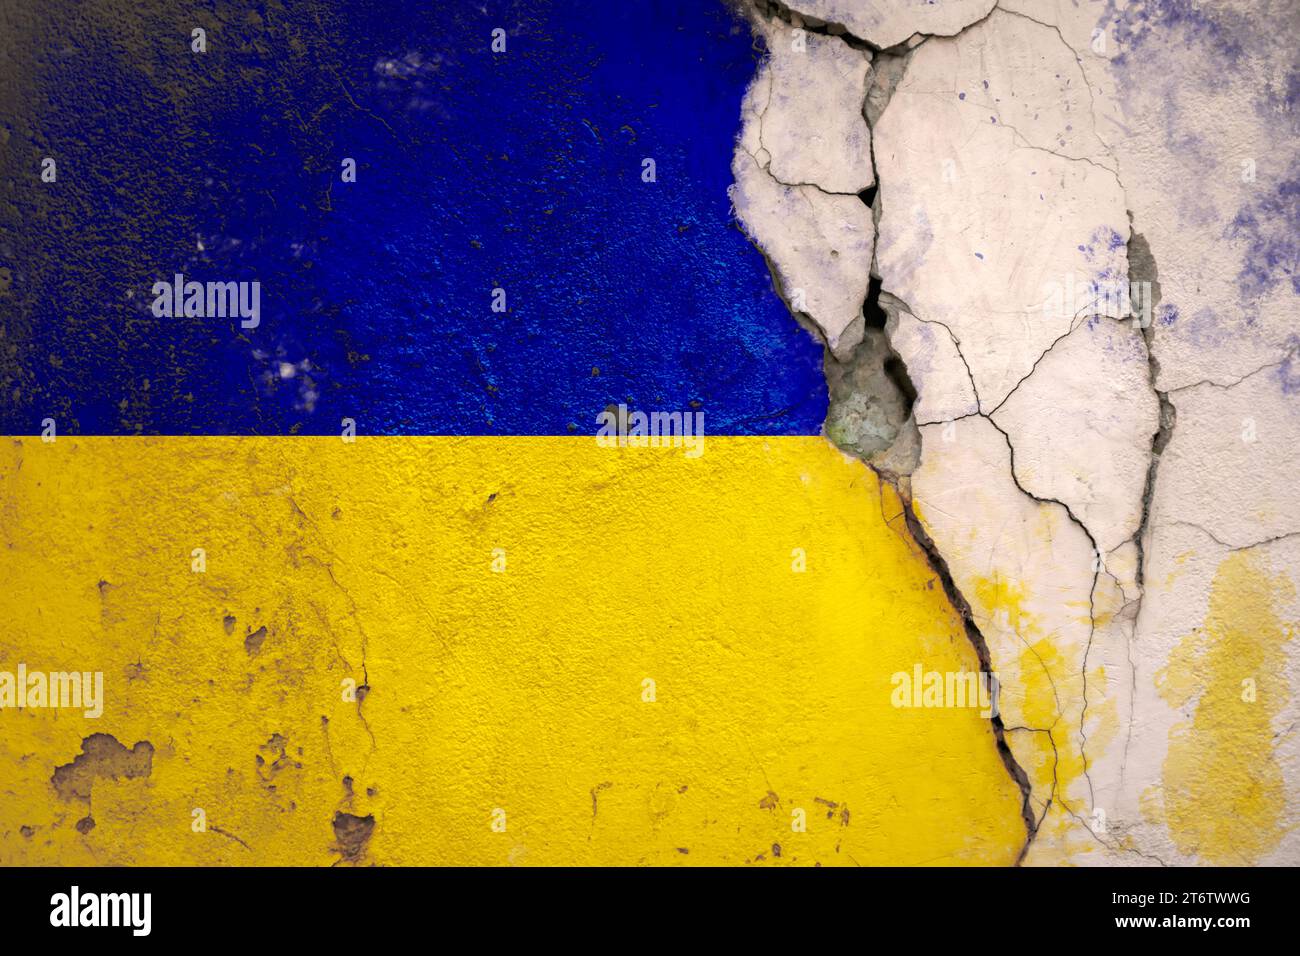 National flag of Ukraine painted on old cracked wall Stock Photo